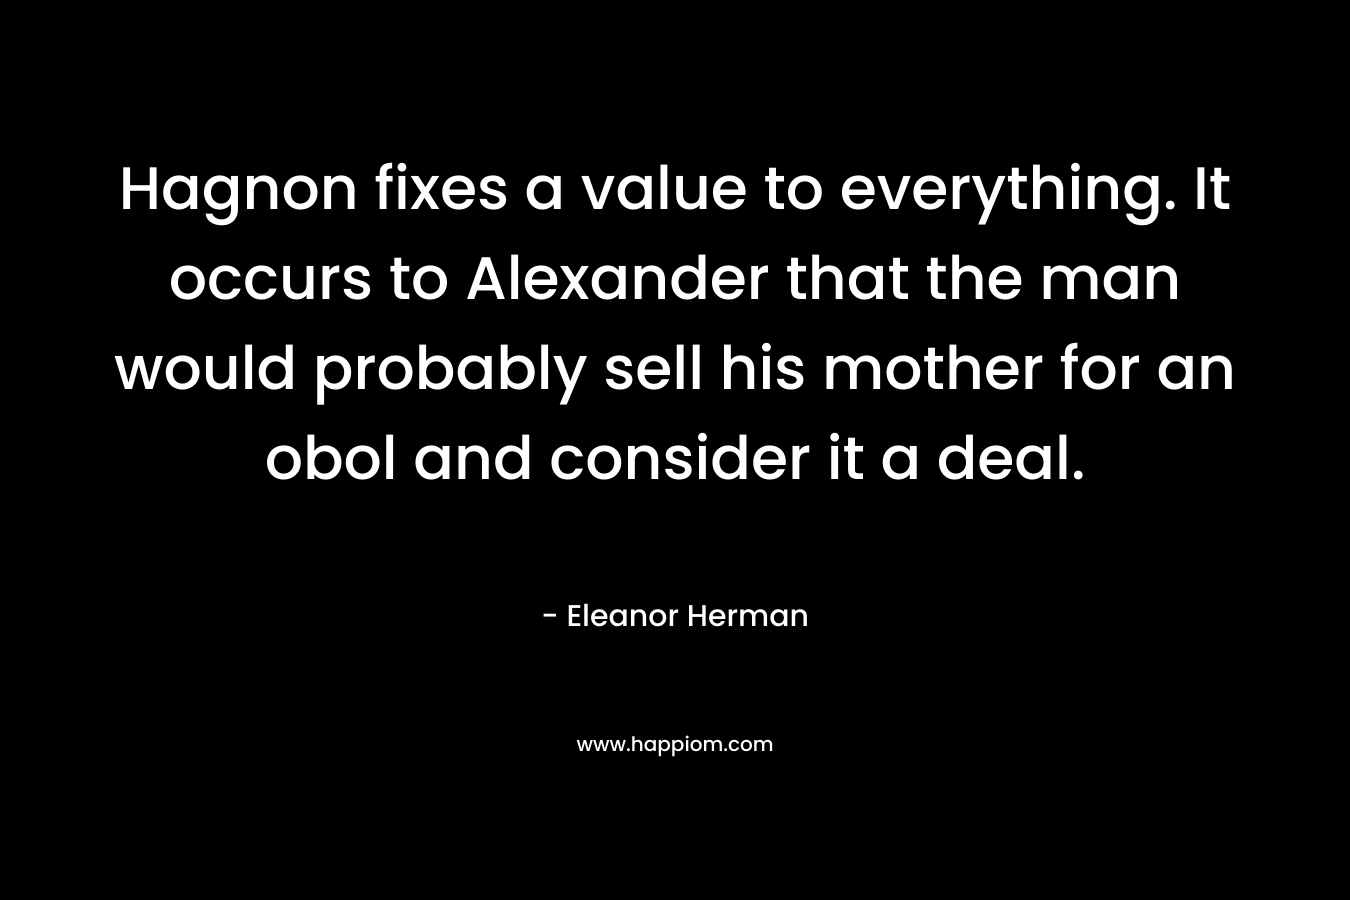 Hagnon fixes a value to everything. It occurs to Alexander that the man would probably sell his mother for an obol and consider it a deal.